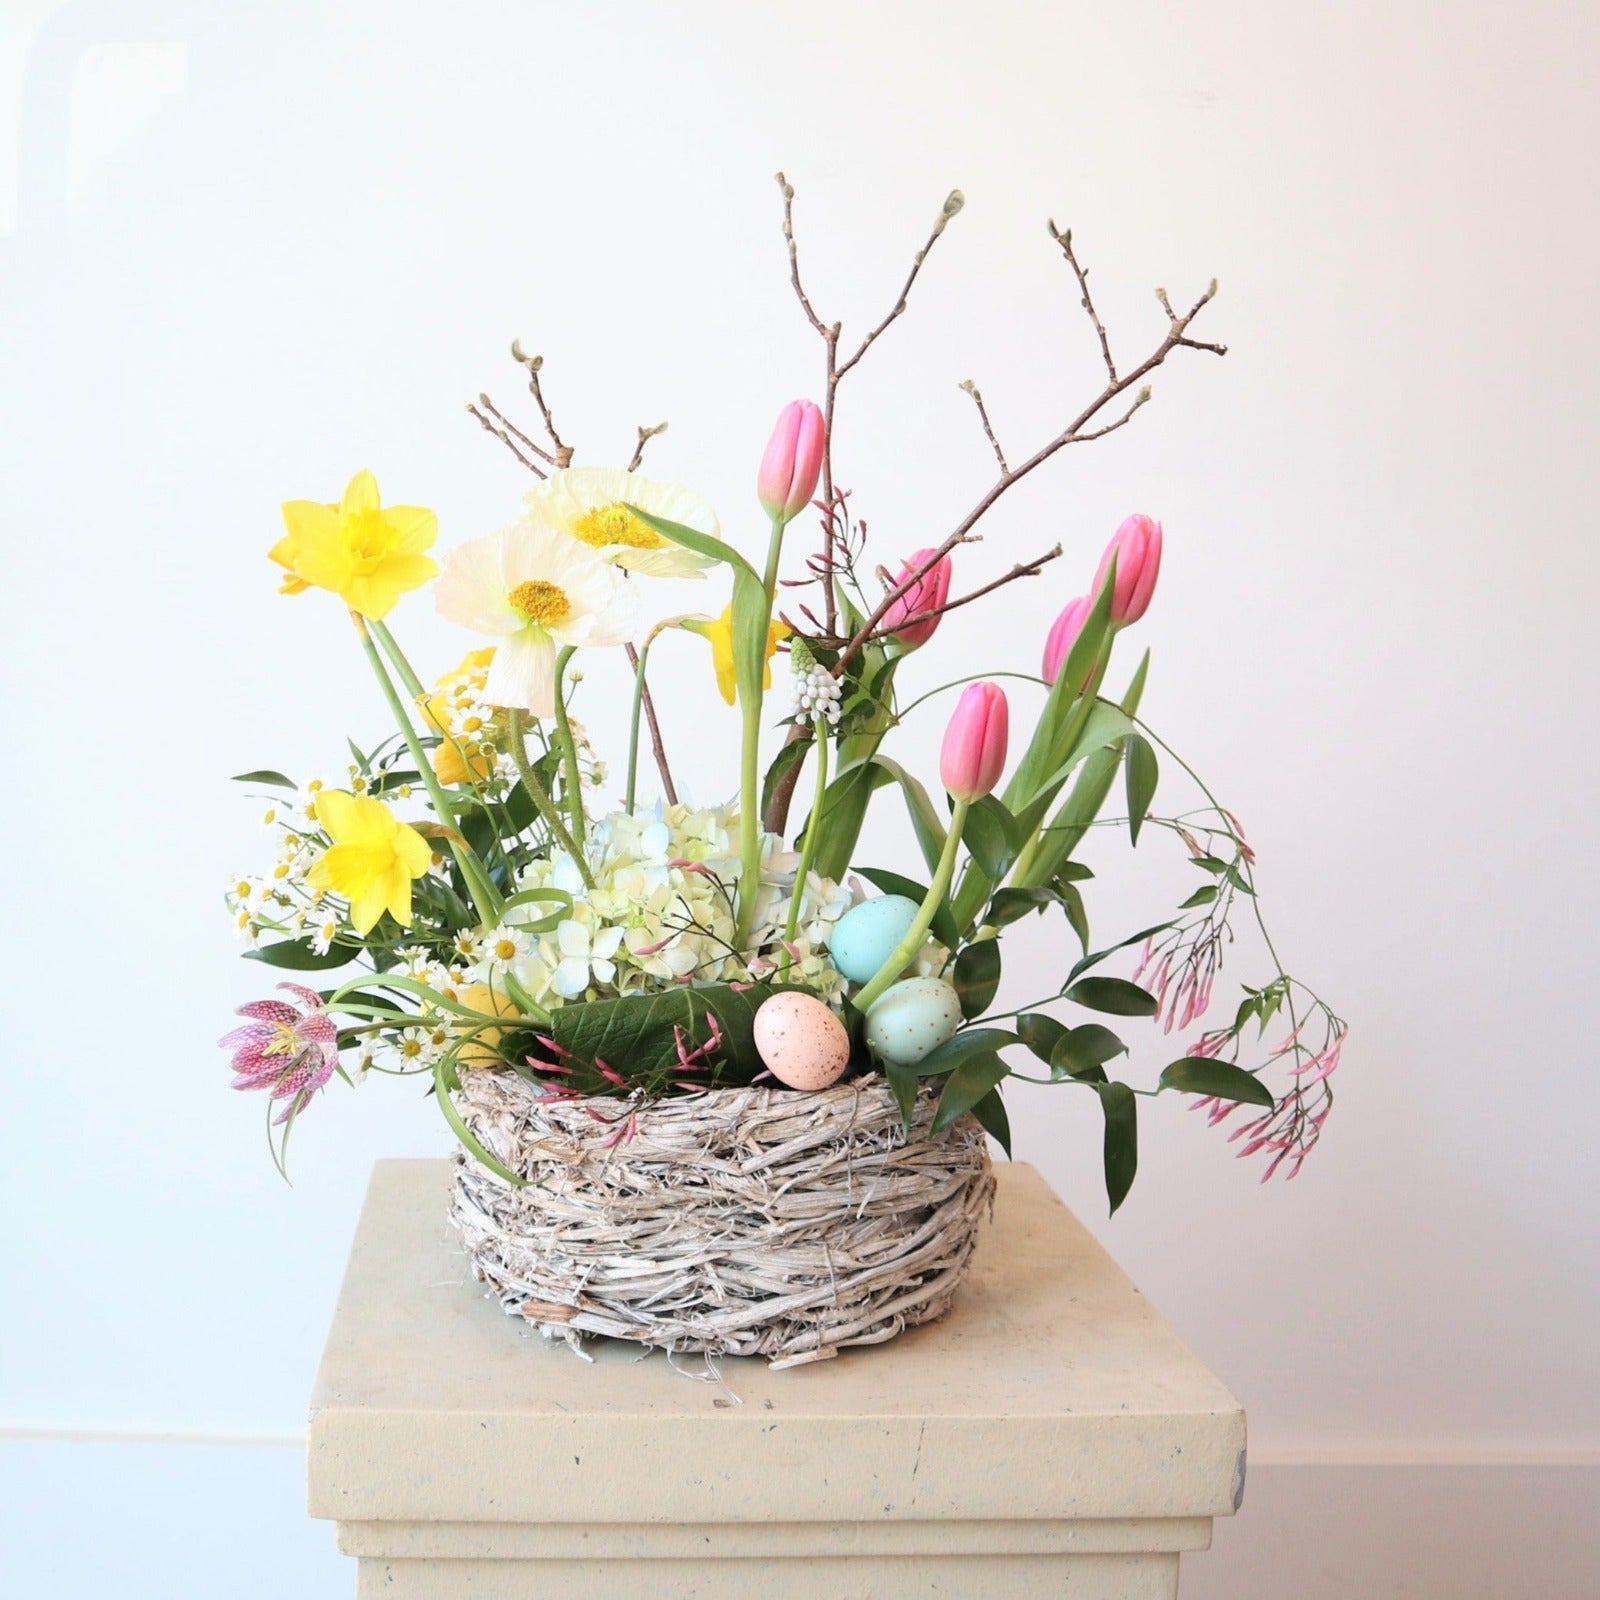 Easter Basket | A spring Easter arrangement with  yellow, white, pink, green, and accent branches. The arrangement is in a basket with decorative pink and blue eggs.